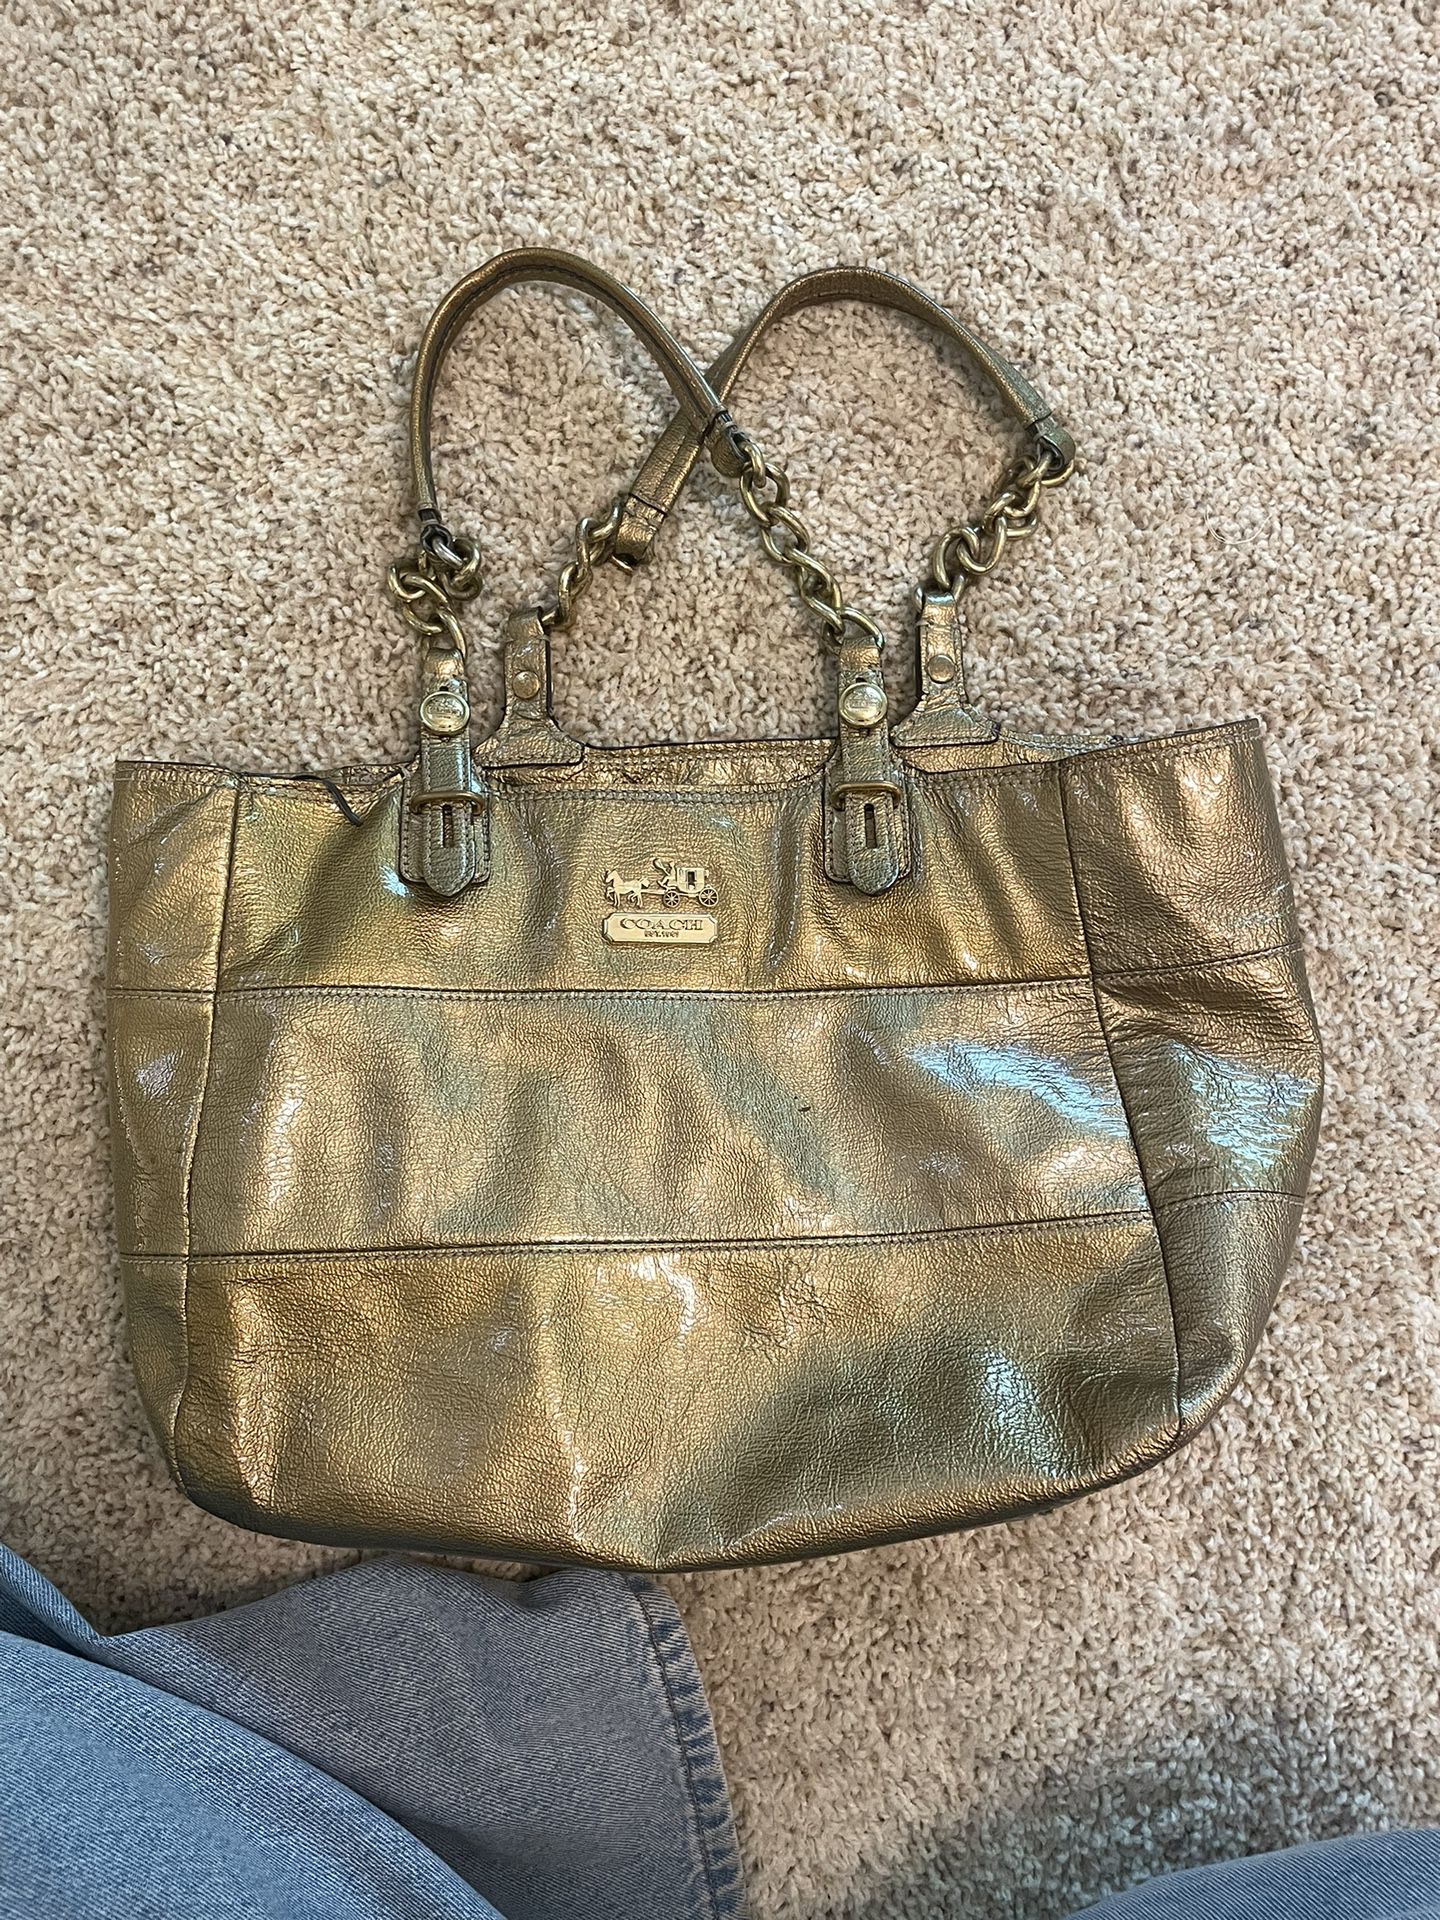 Coach purse, gold color, with blue interior.